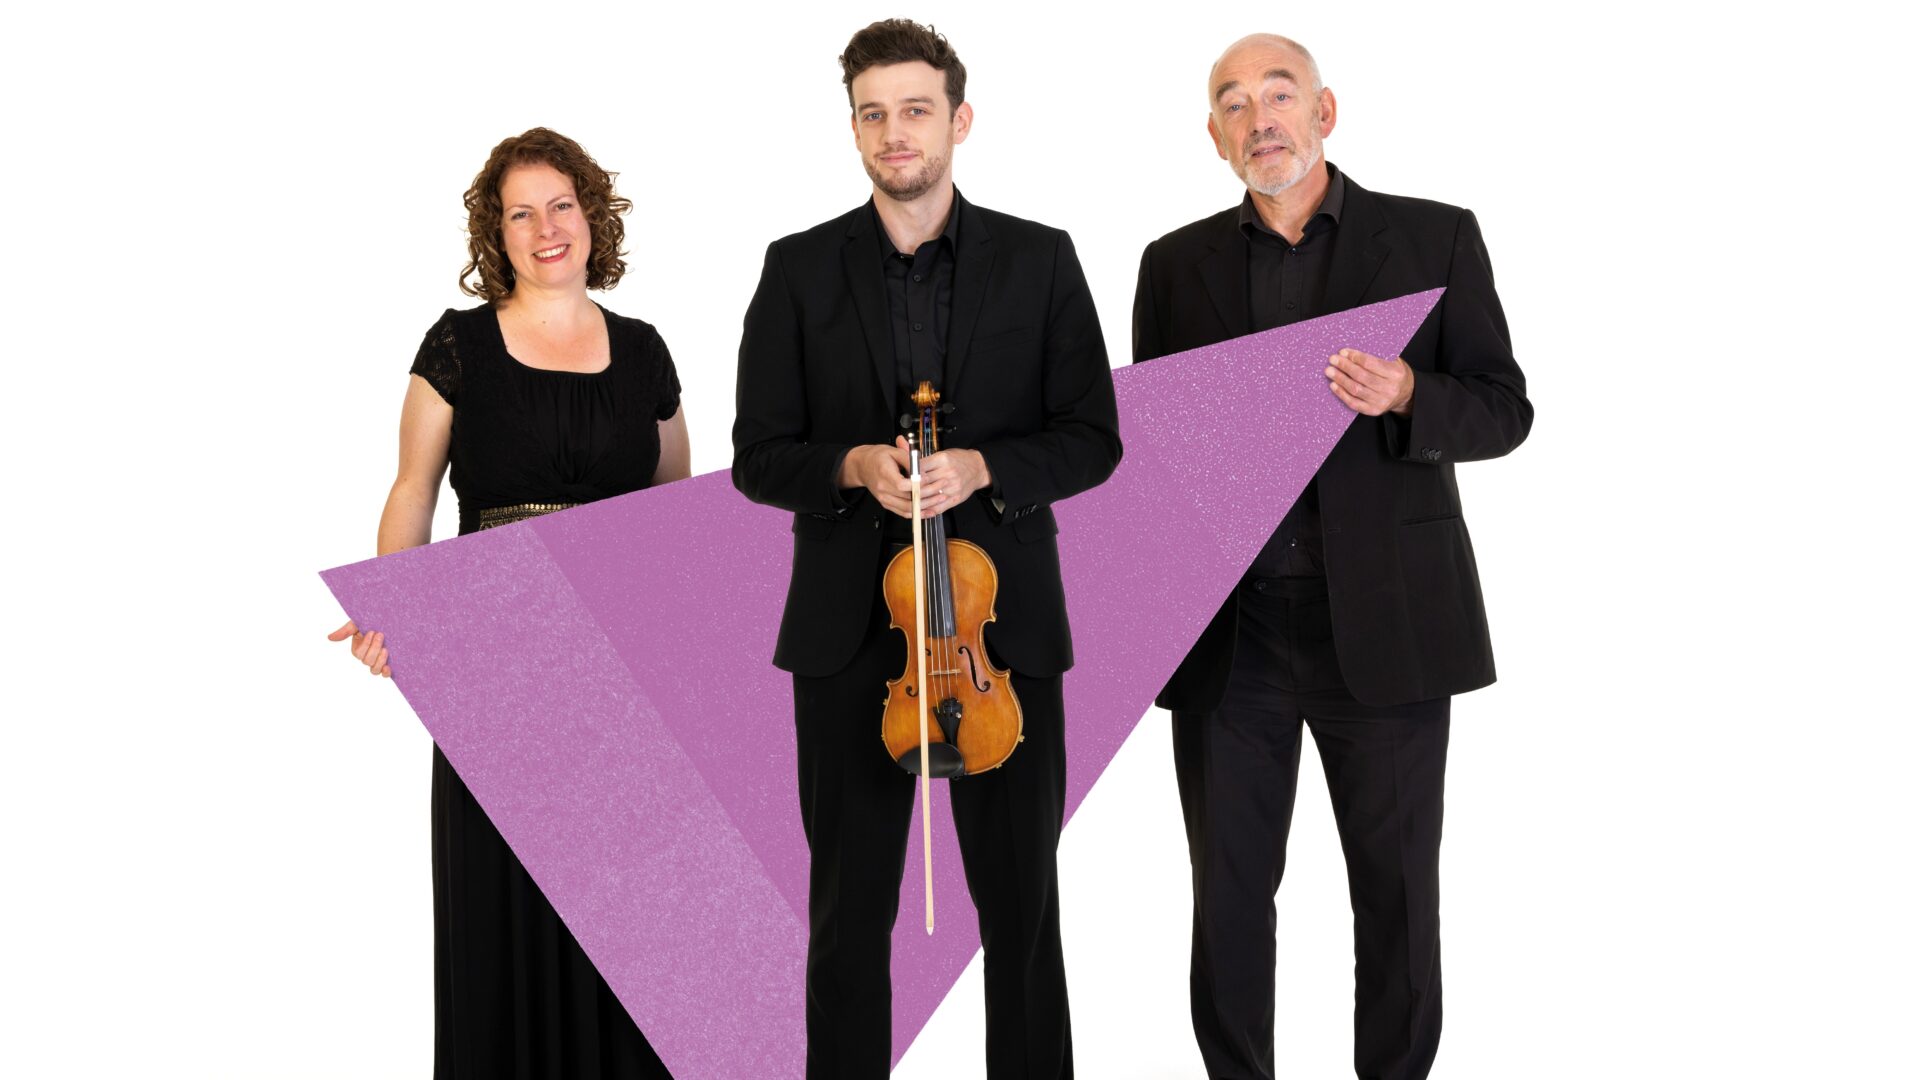 Three BSO musicians, one holding a viola